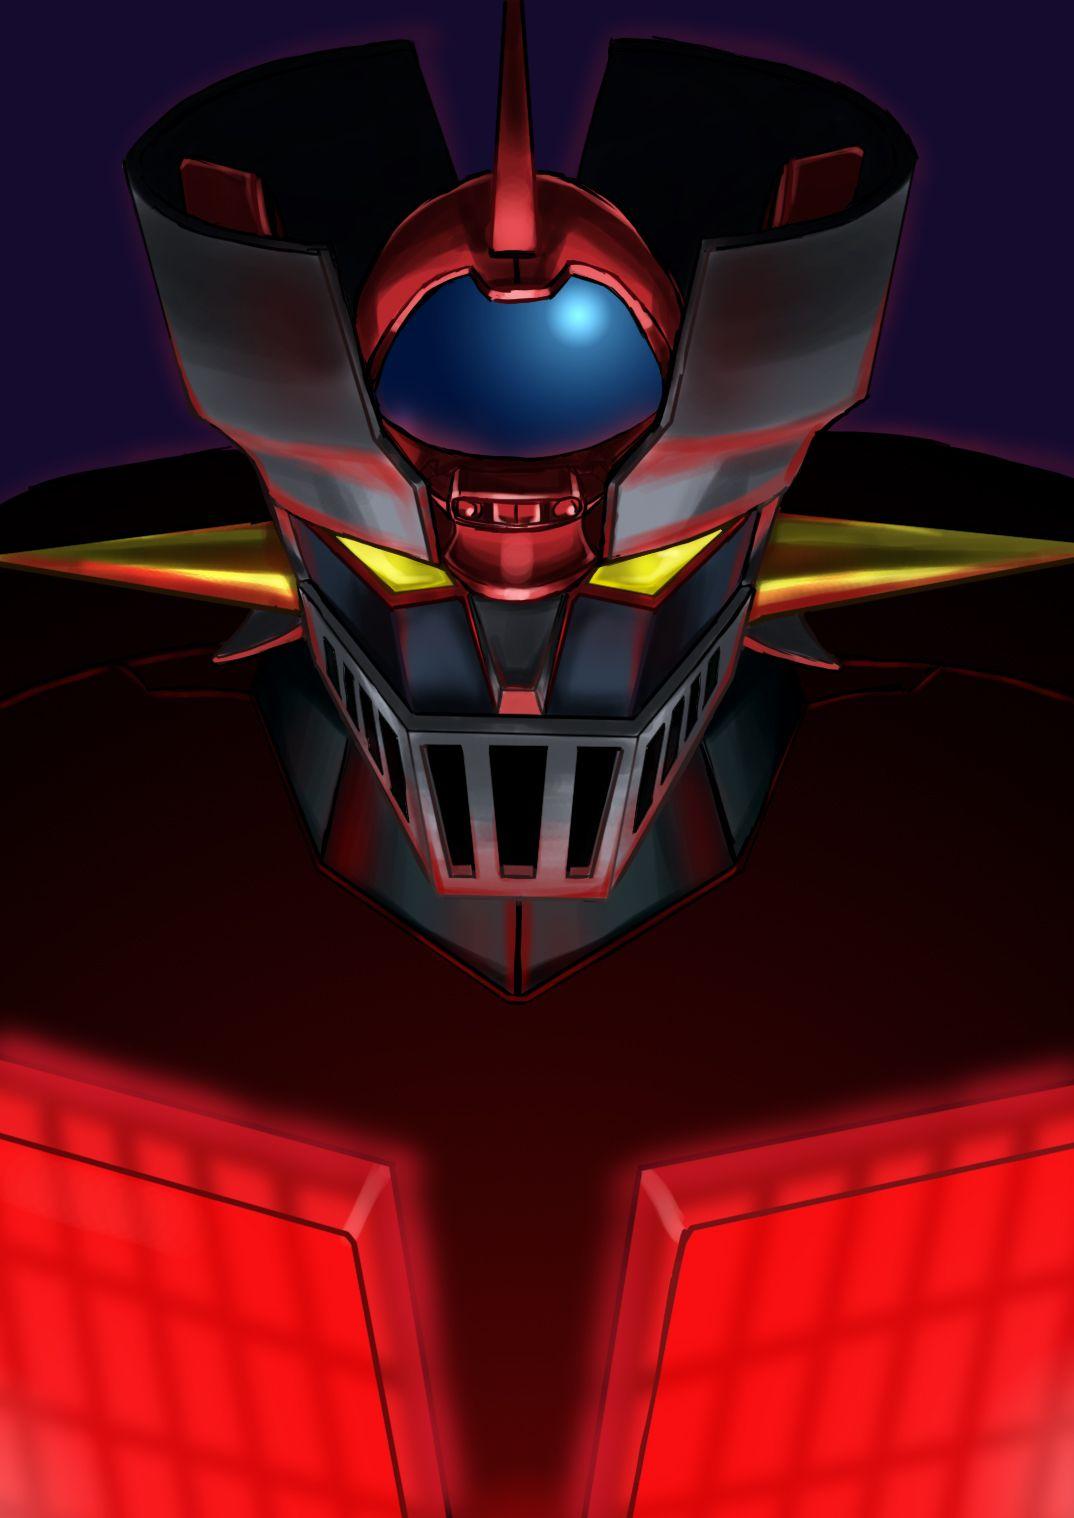 Mazinger Z (artist unknown). If you're old enough to